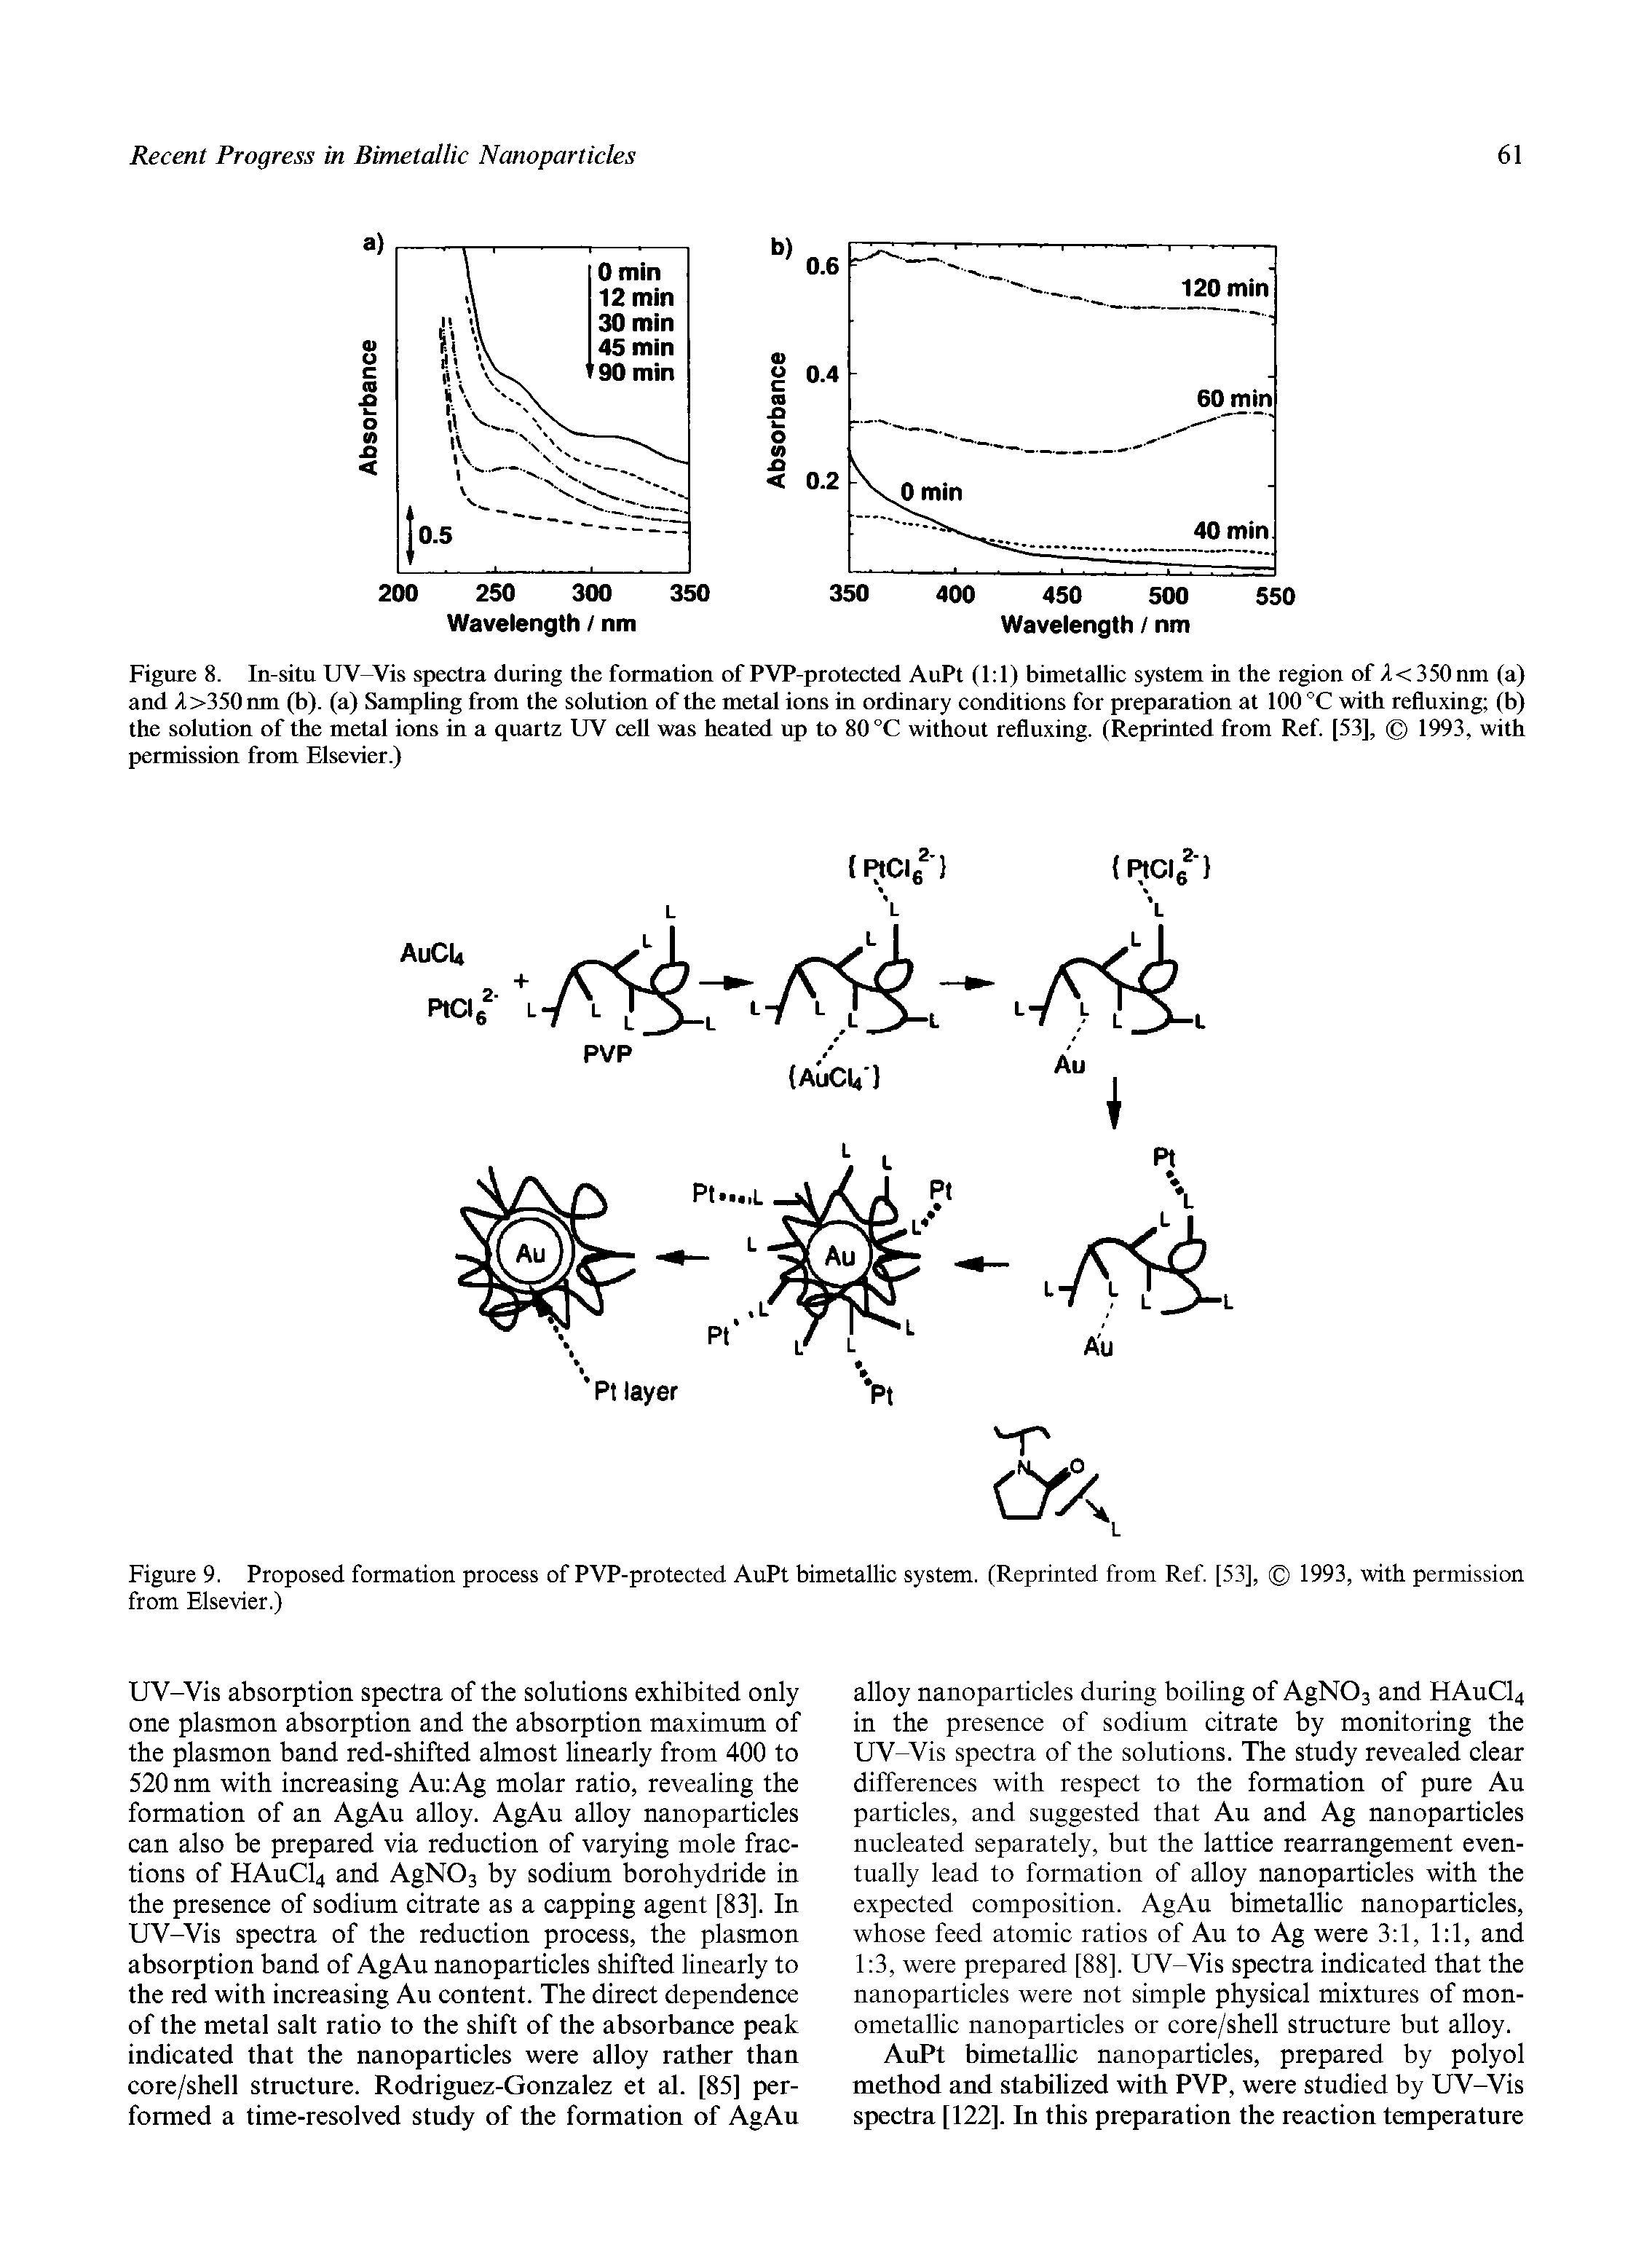 Figure 9. Proposed formation process of PVP-protected AuPt bimetallic system. (Reprinted from Ref [53], 1993, with permission from Elsevier.)...